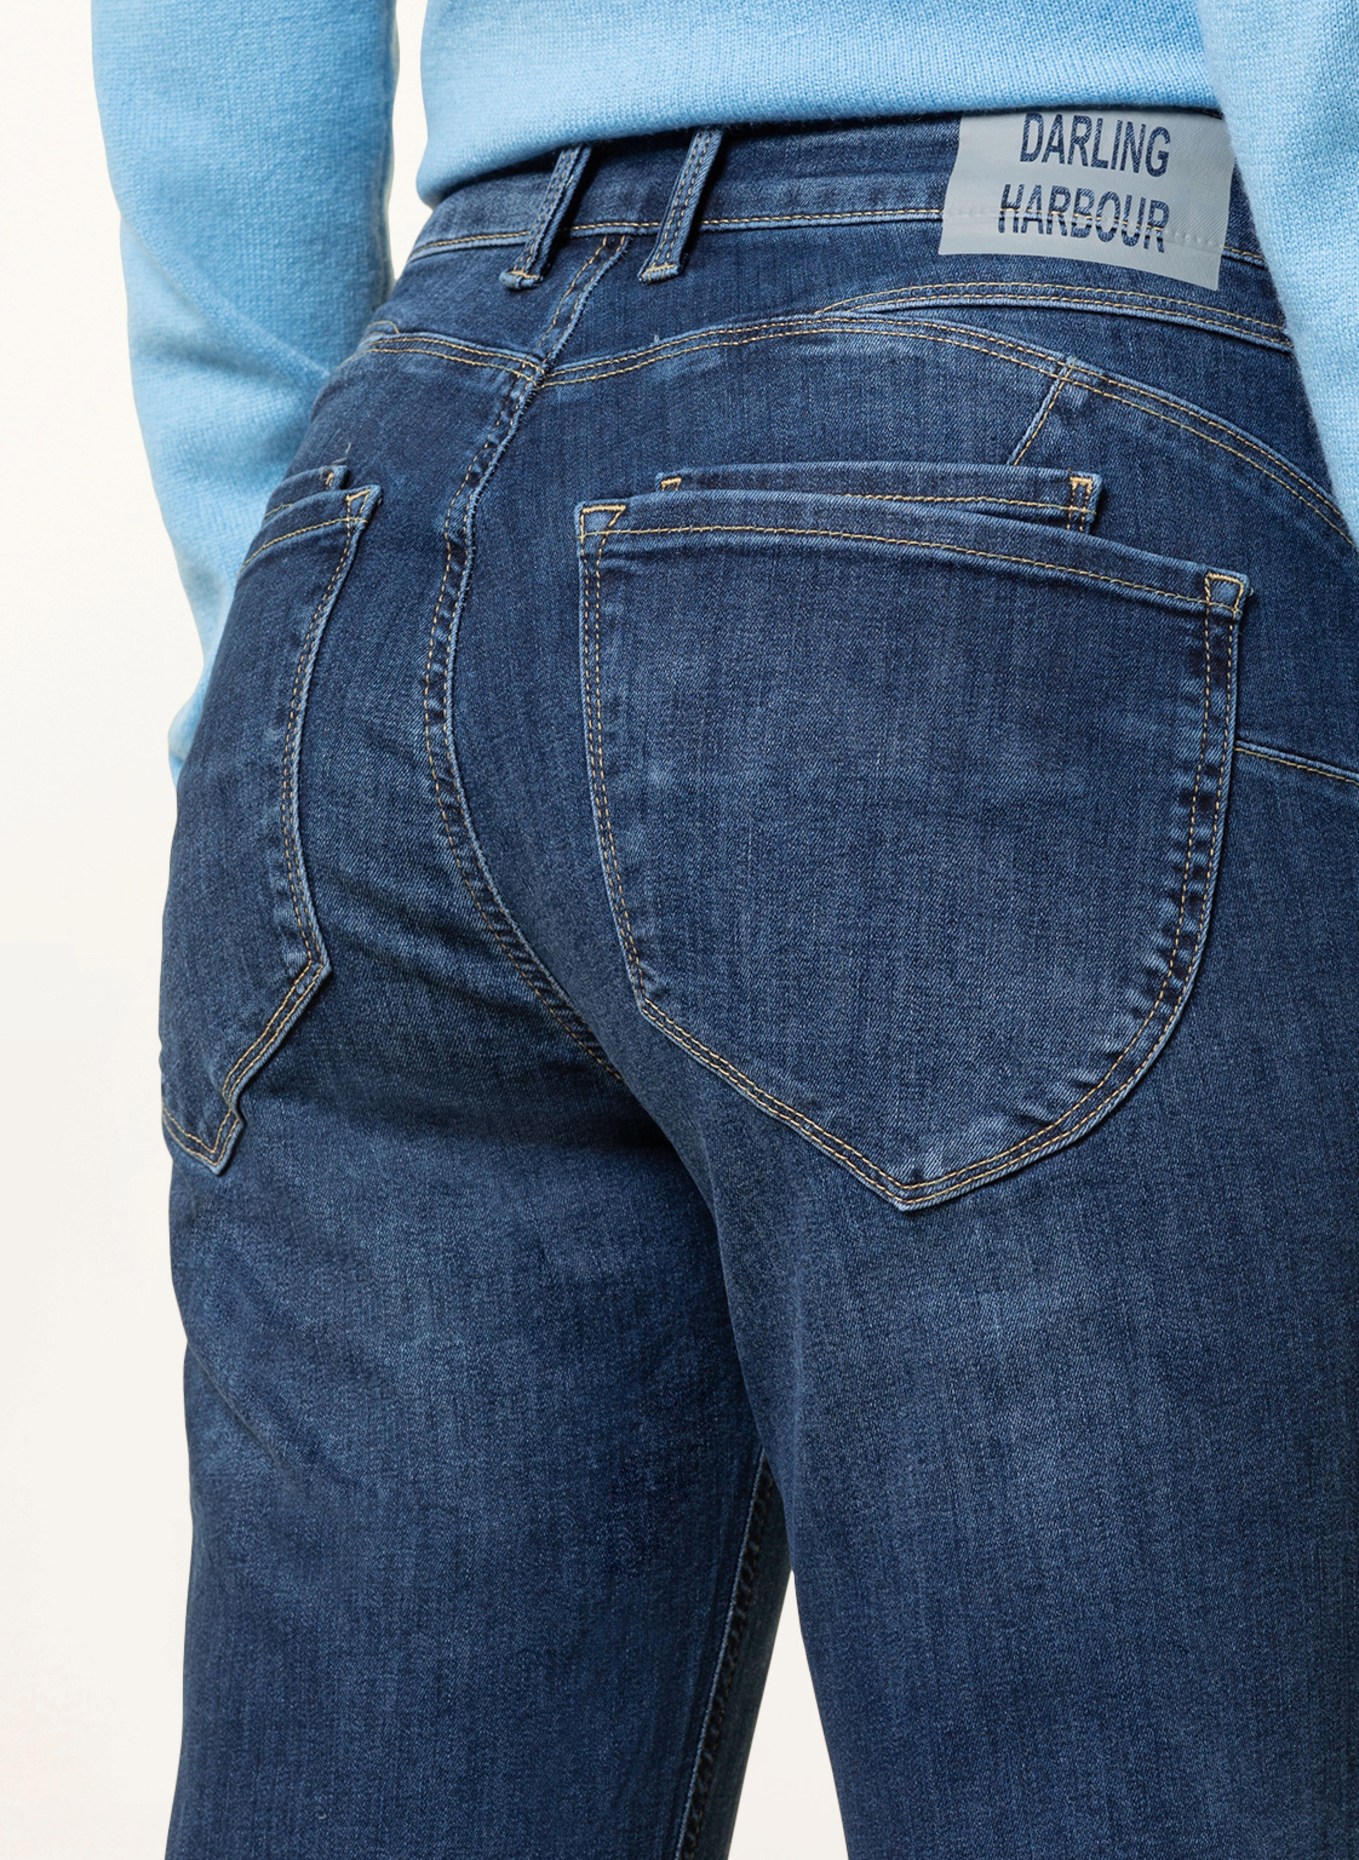 darling harbour Straight jeans, Color: DARK BLUE USED (Image 5)